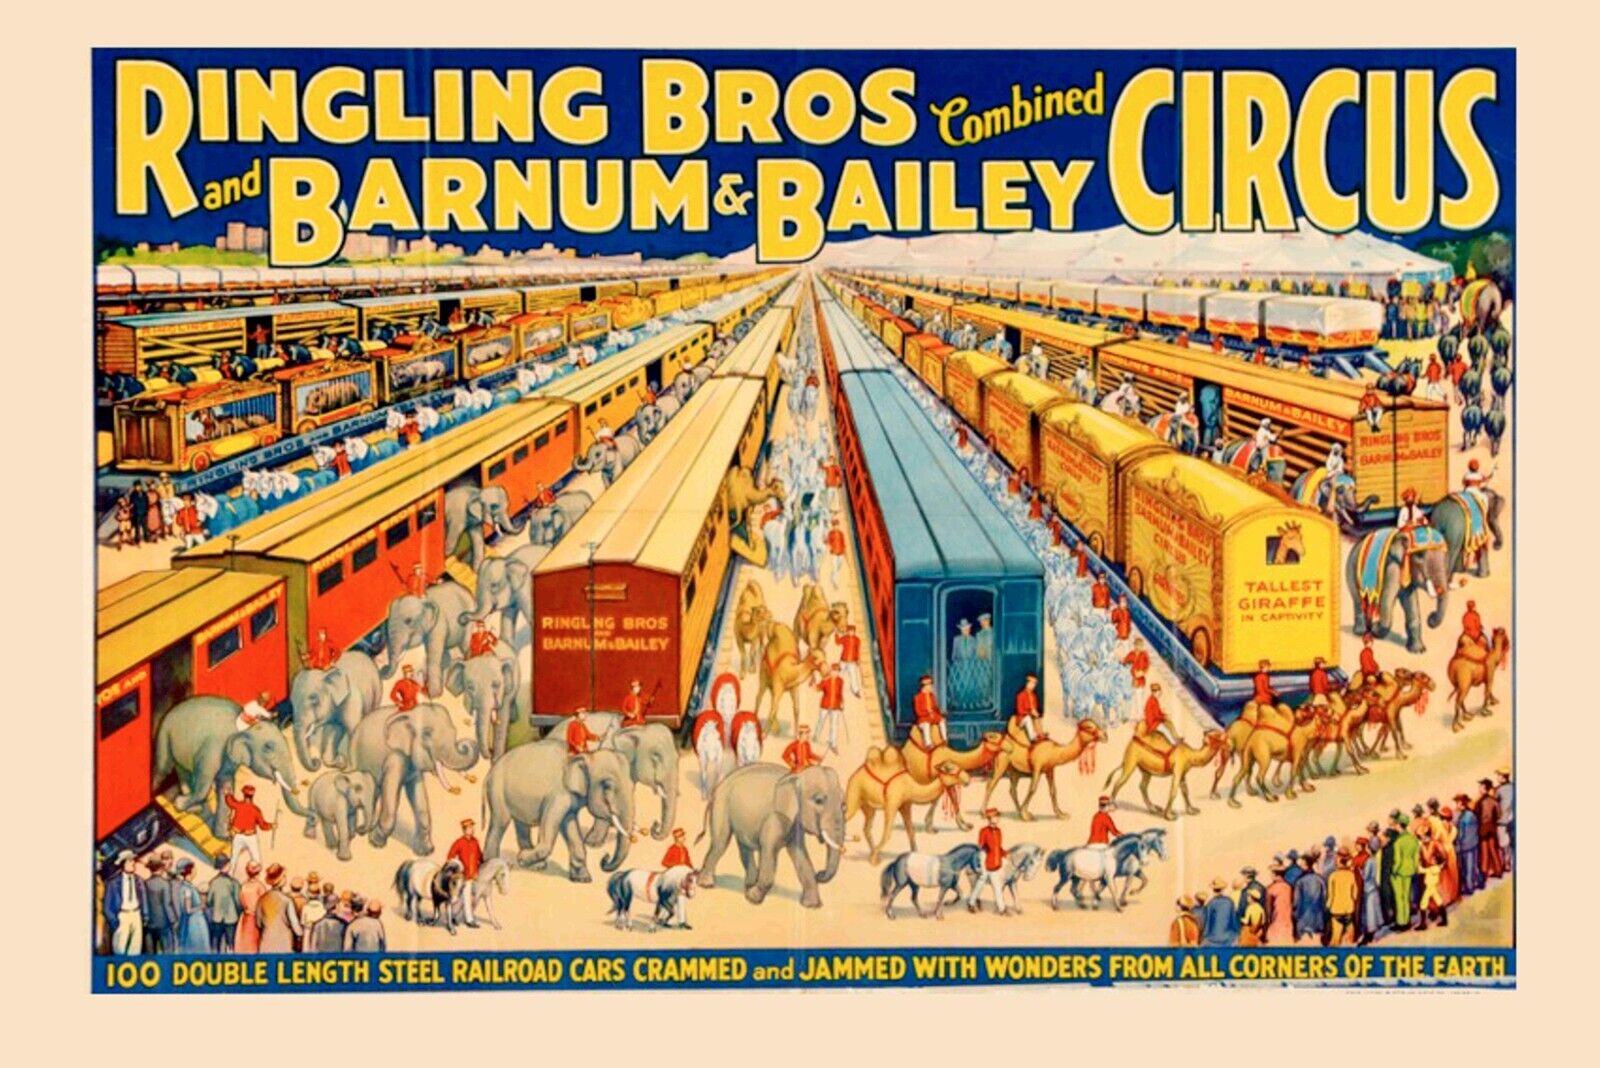 Ringling Brothers Circus  Train Mousepad 7 x 9 Vintage Photo mouse pad art